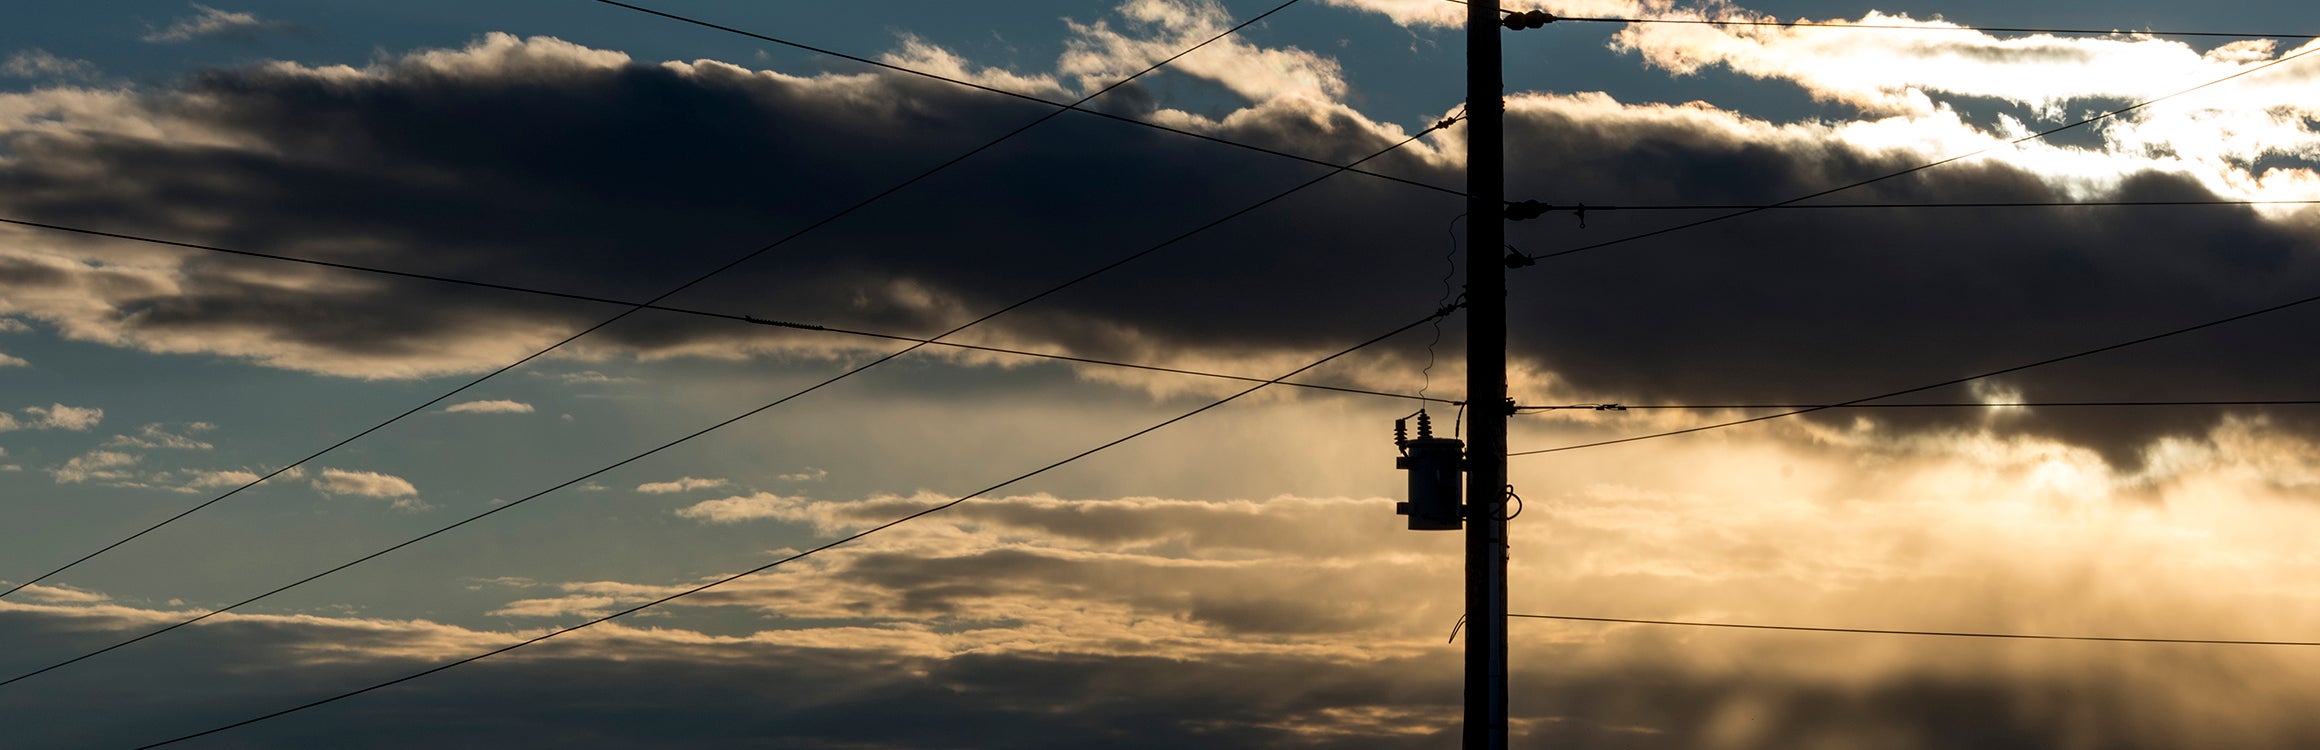 Powerlines in front of a cloudy sunset